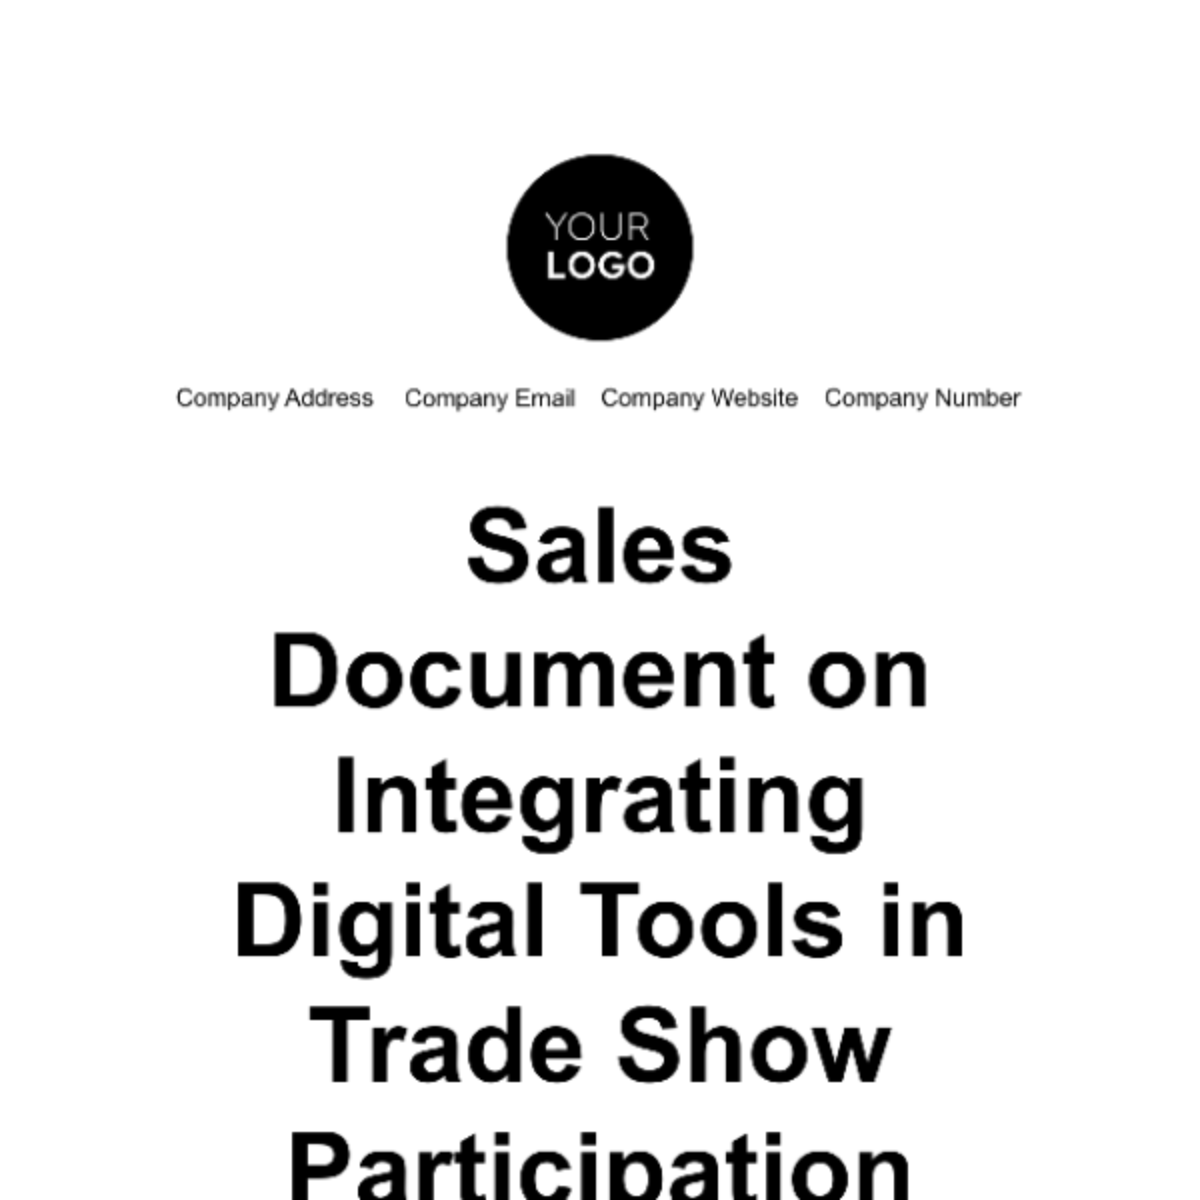 Sales Document on Integrating Digital Tools in Trade Show Participation Template